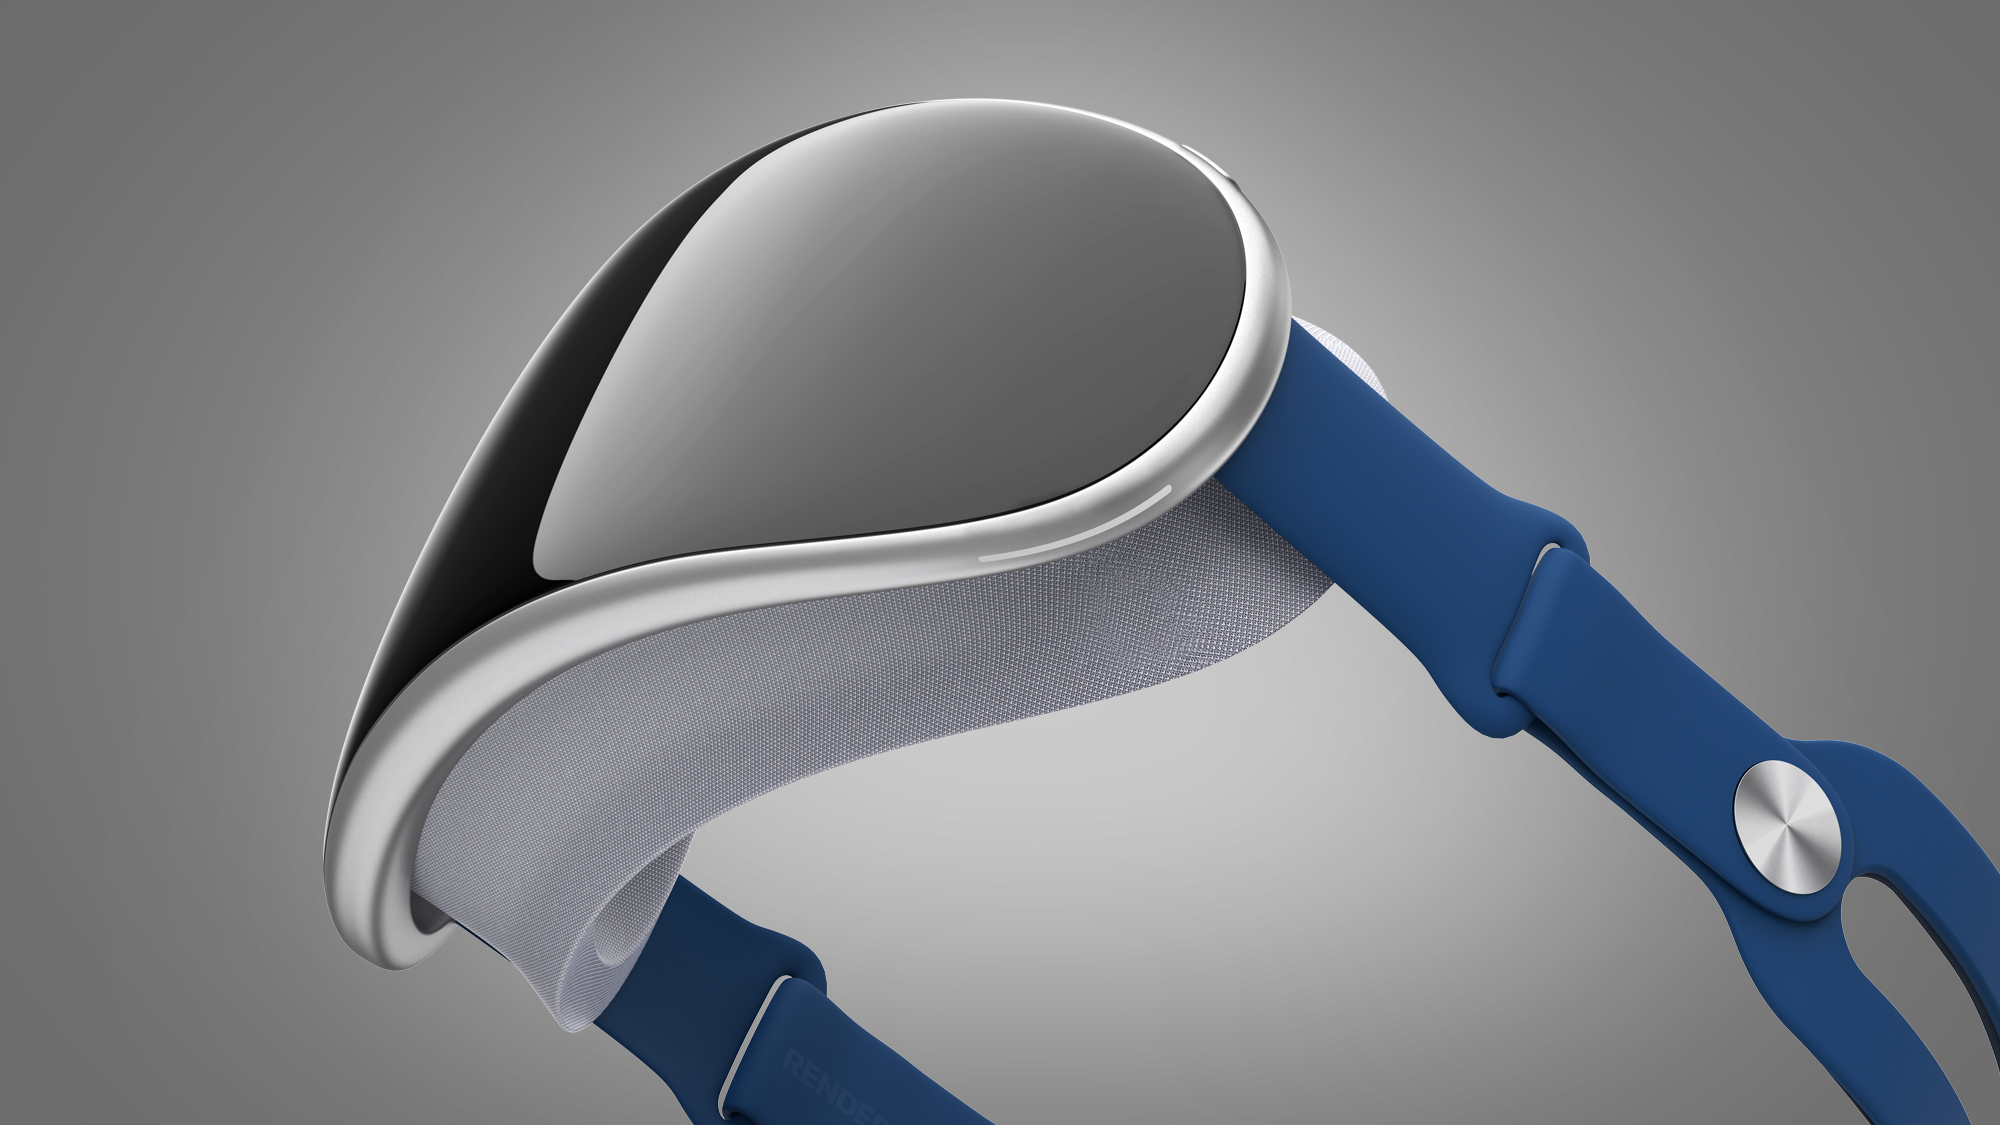 A render of the rumored Apple Reality Pro headset on a grey background, it has a small front panel and elastic straps.